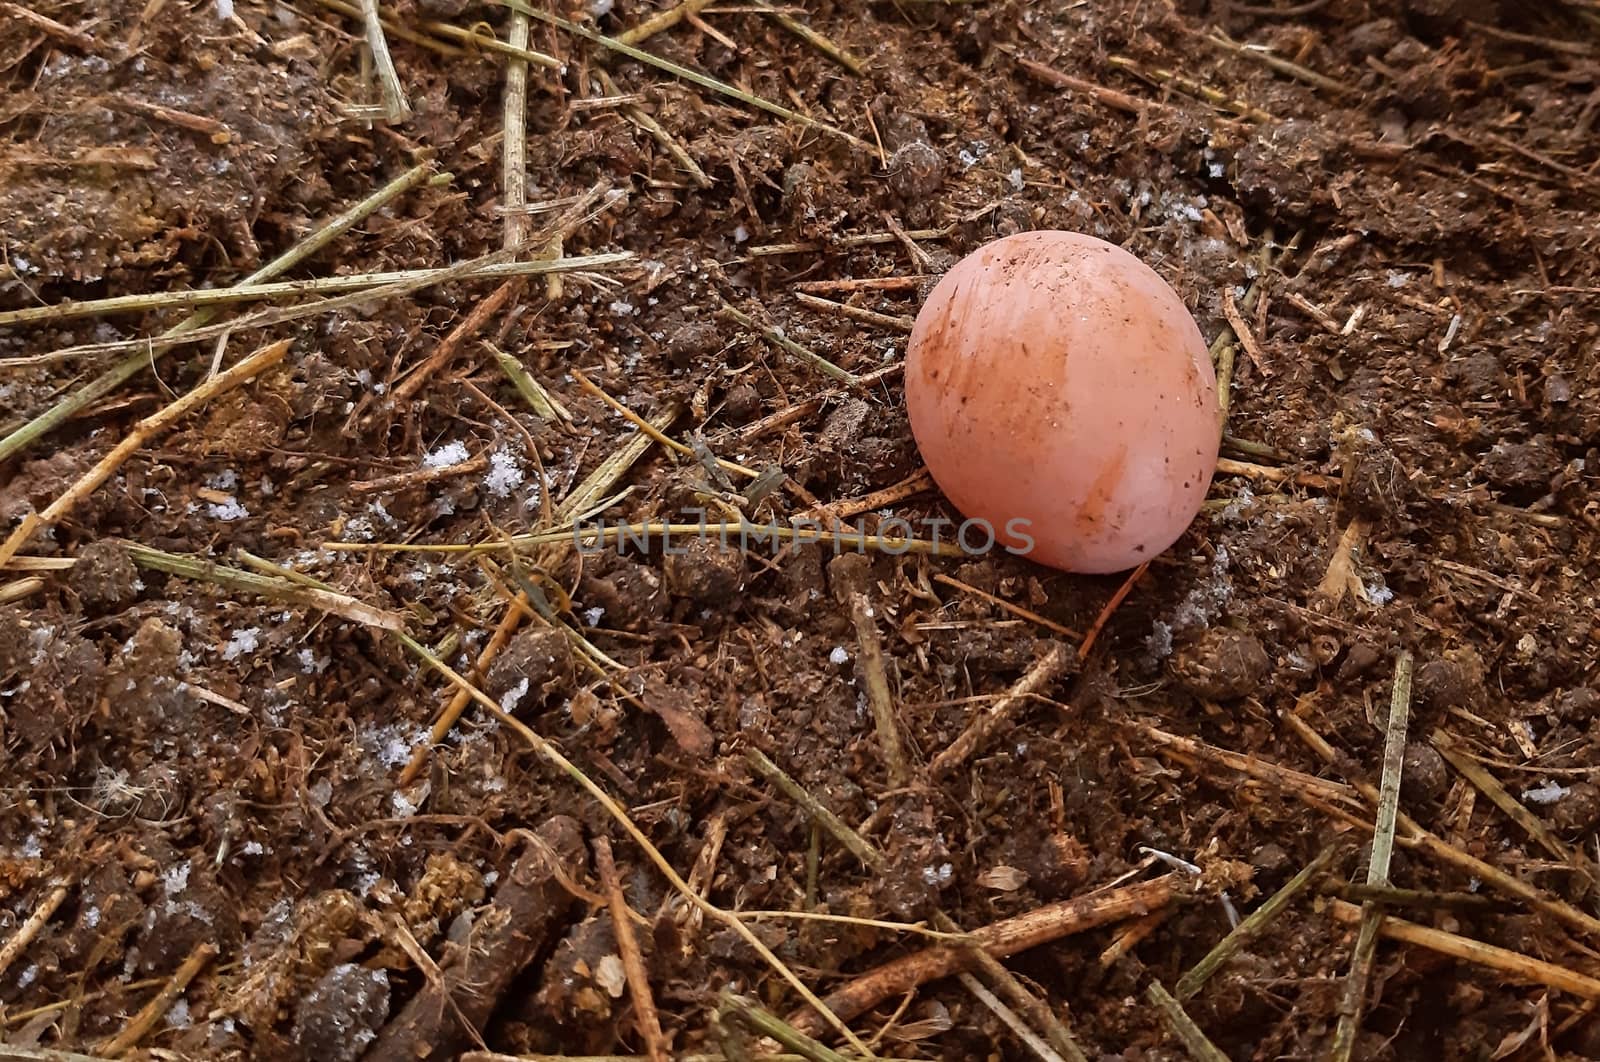 Chicken egg natural and fresh on the ground.